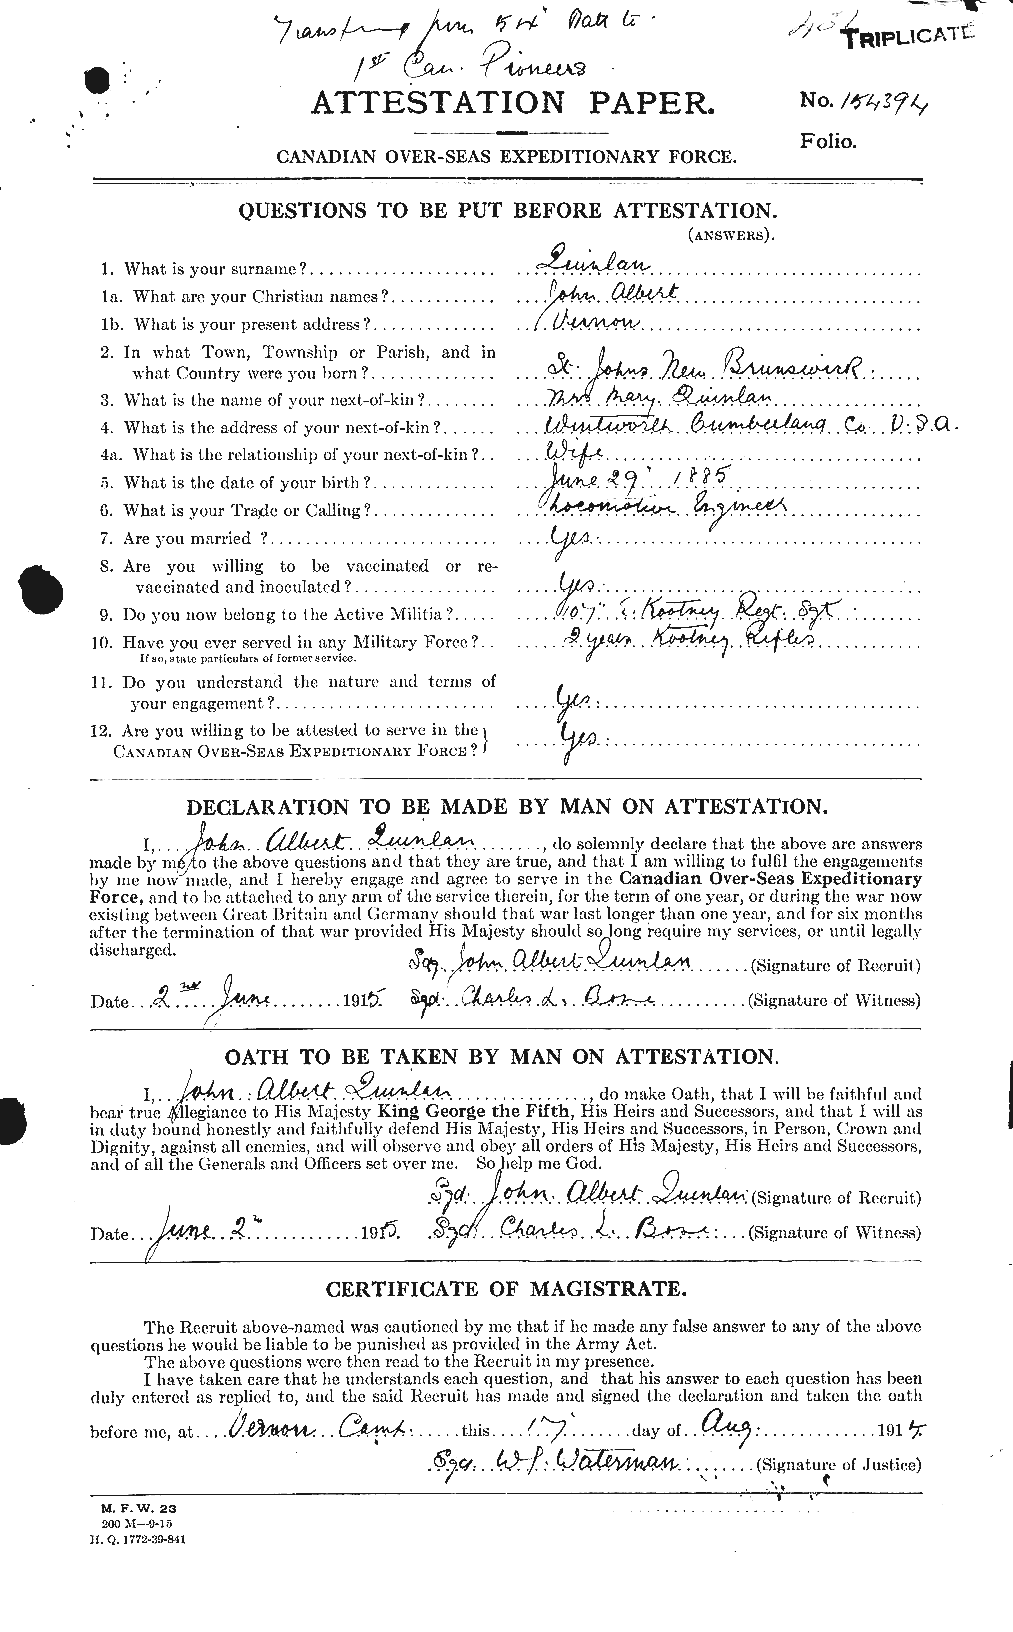 Personnel Records of the First World War - CEF 590218a